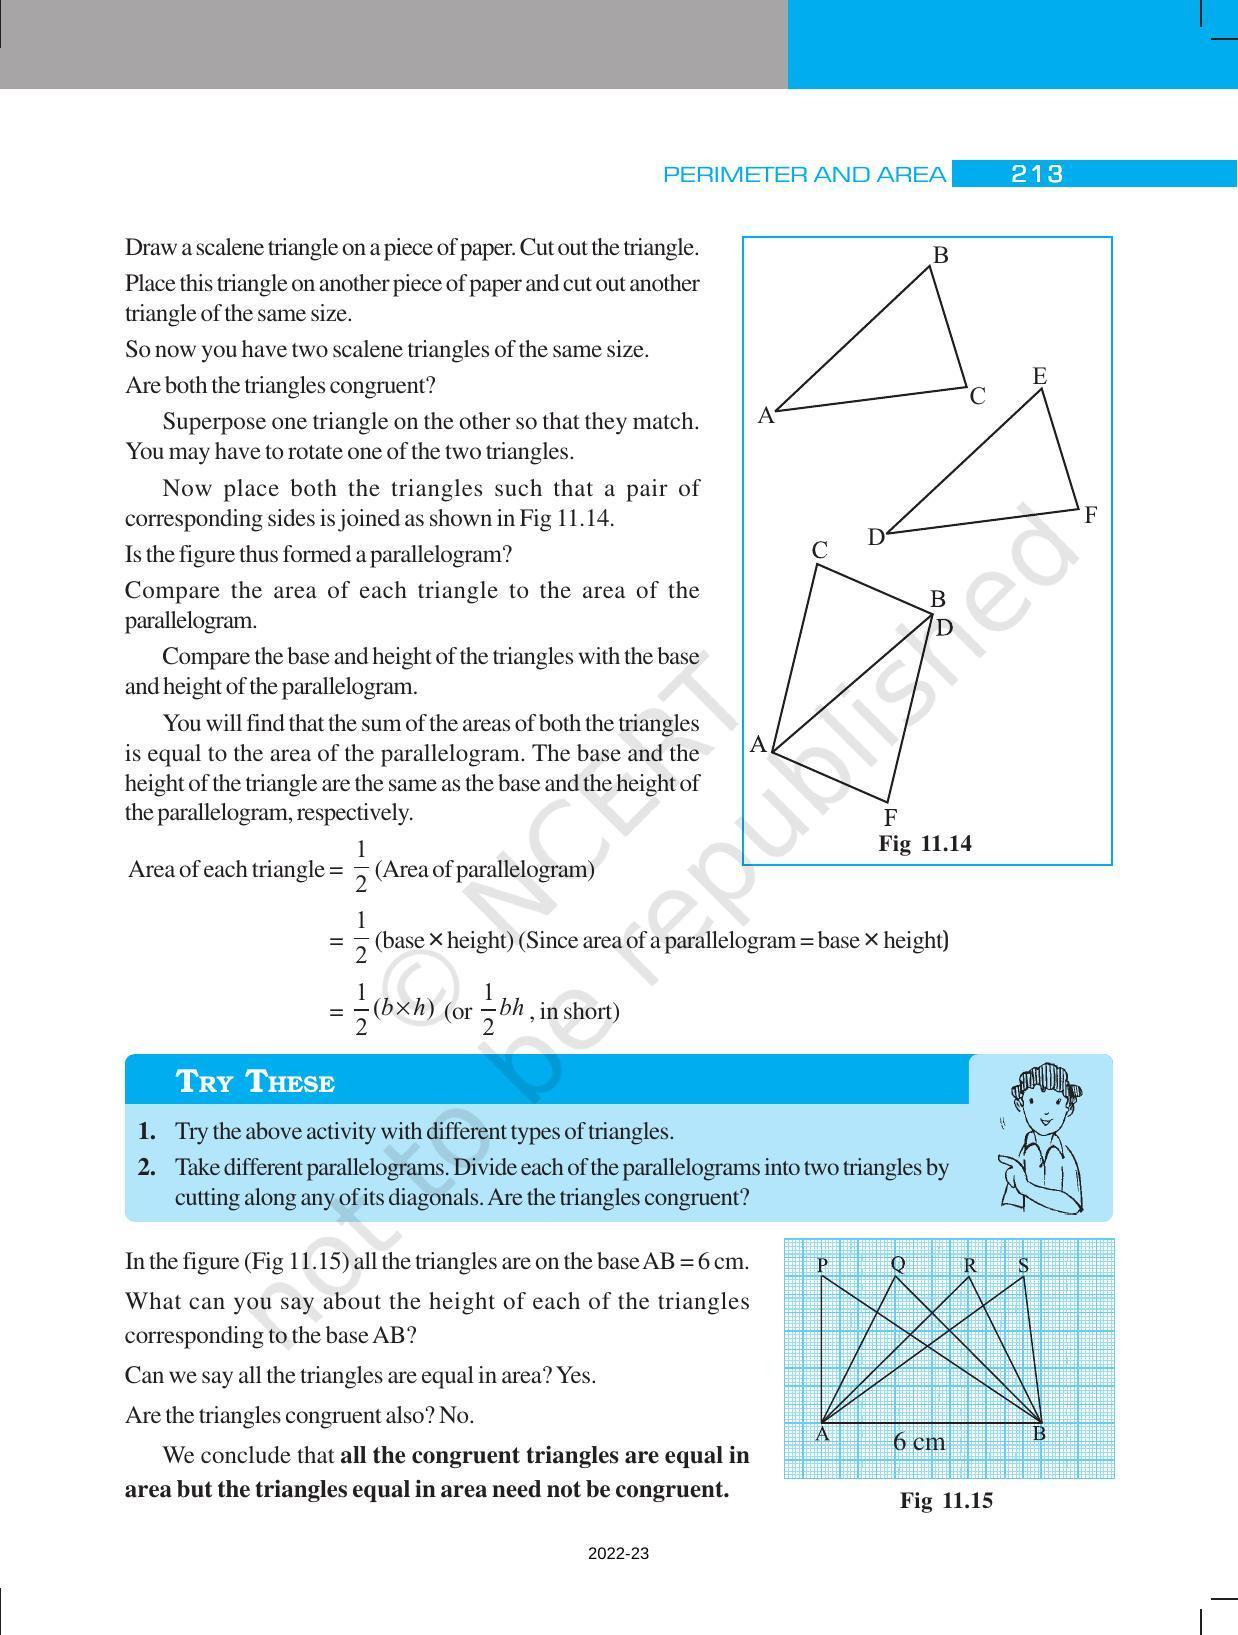 NCERT Book for Class 7 Maths: Chapter 11-Perimeter and Area - Page 9